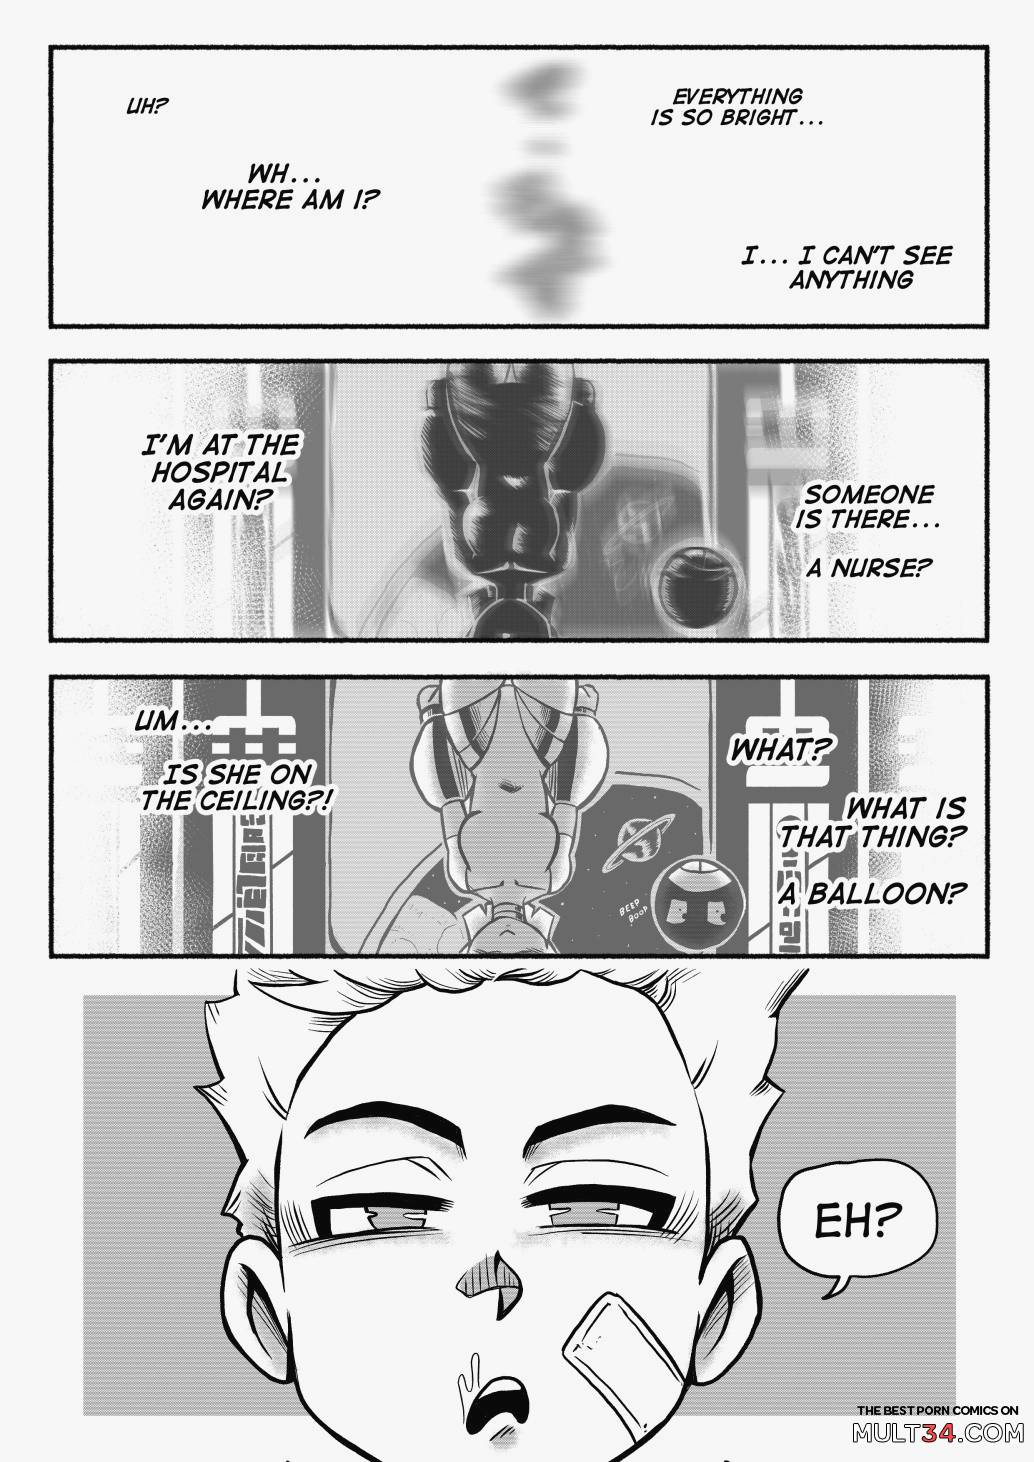 Abducted! - Mr.E page 4